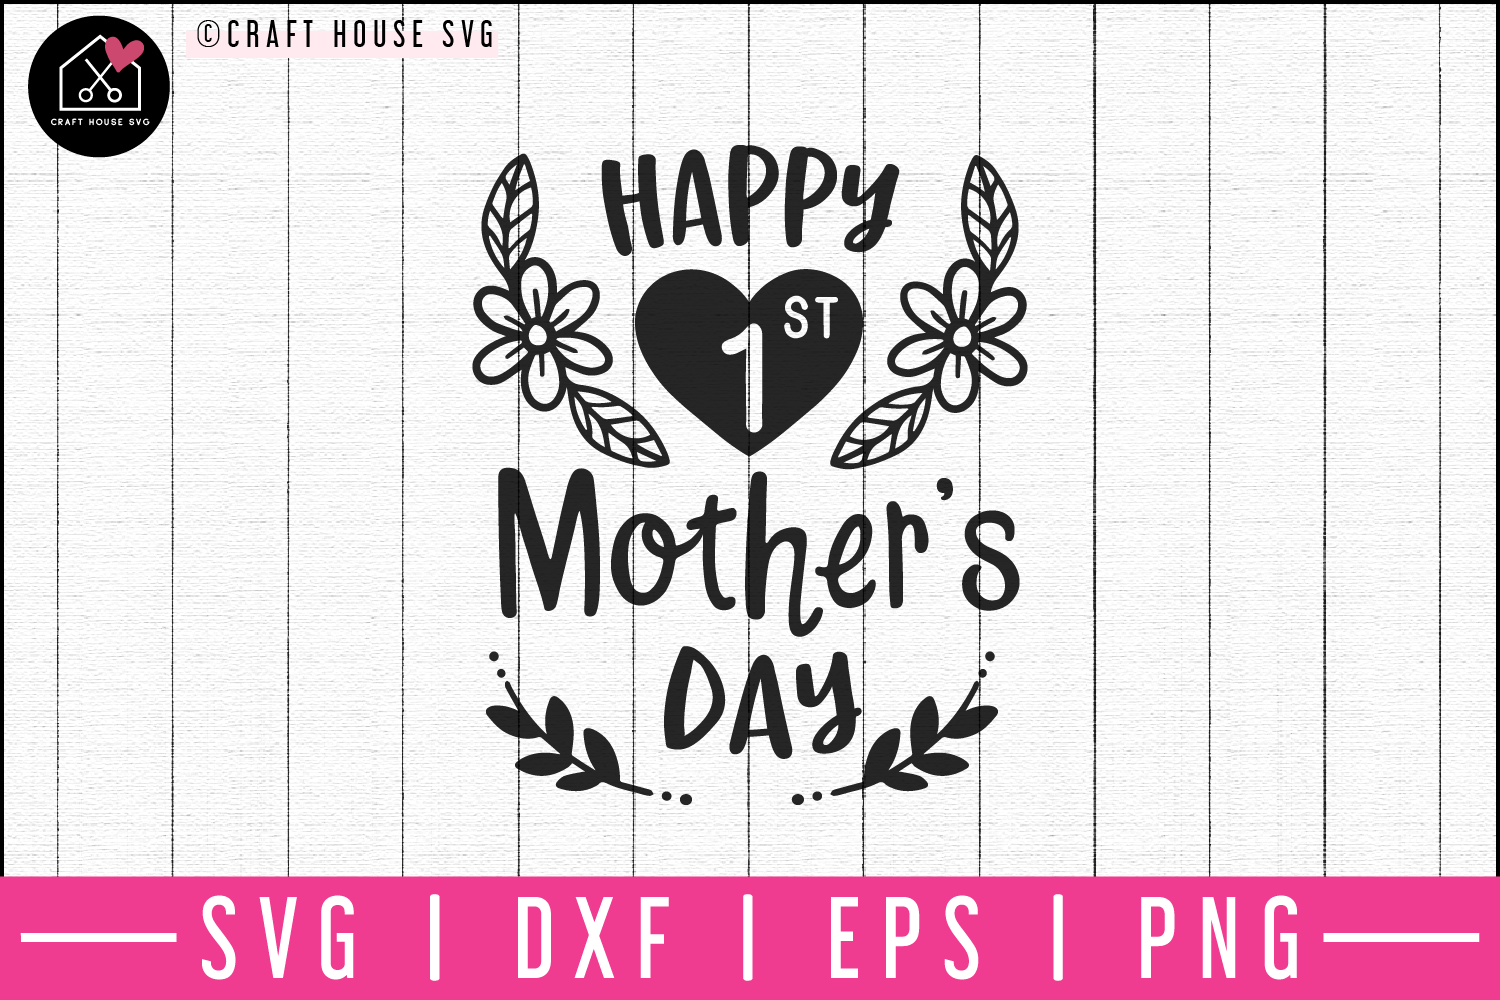 Happy first mothers day SVG | M52F - Craft House SVG